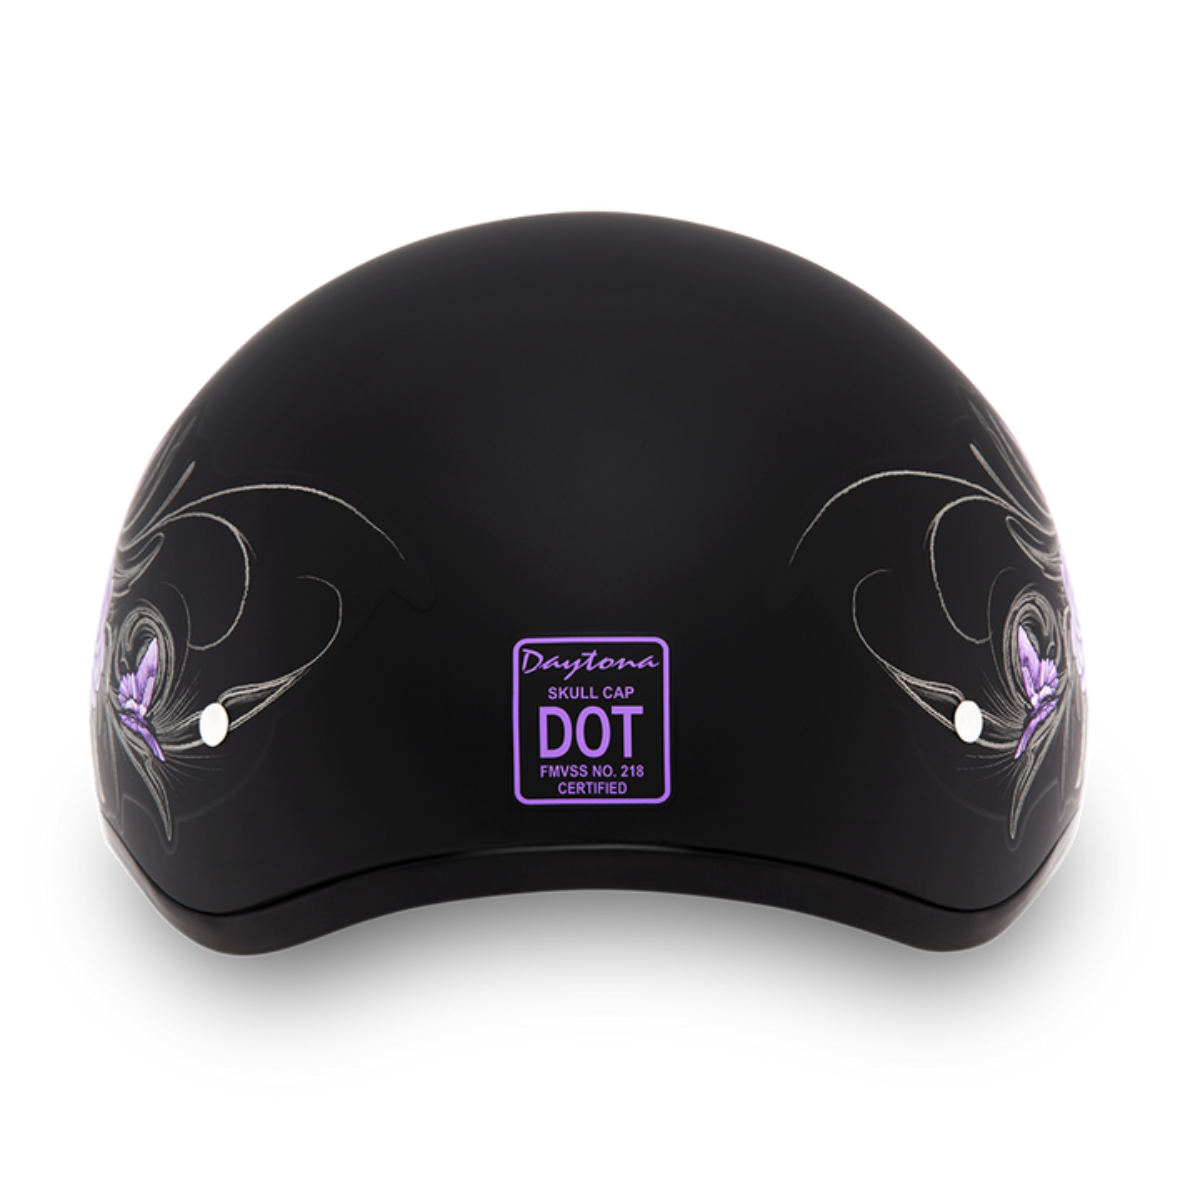 Daytona D.O.T Skull Cap - w/Wild at Heart half shell motorcycle helmet with decorative purple designs on the sides.